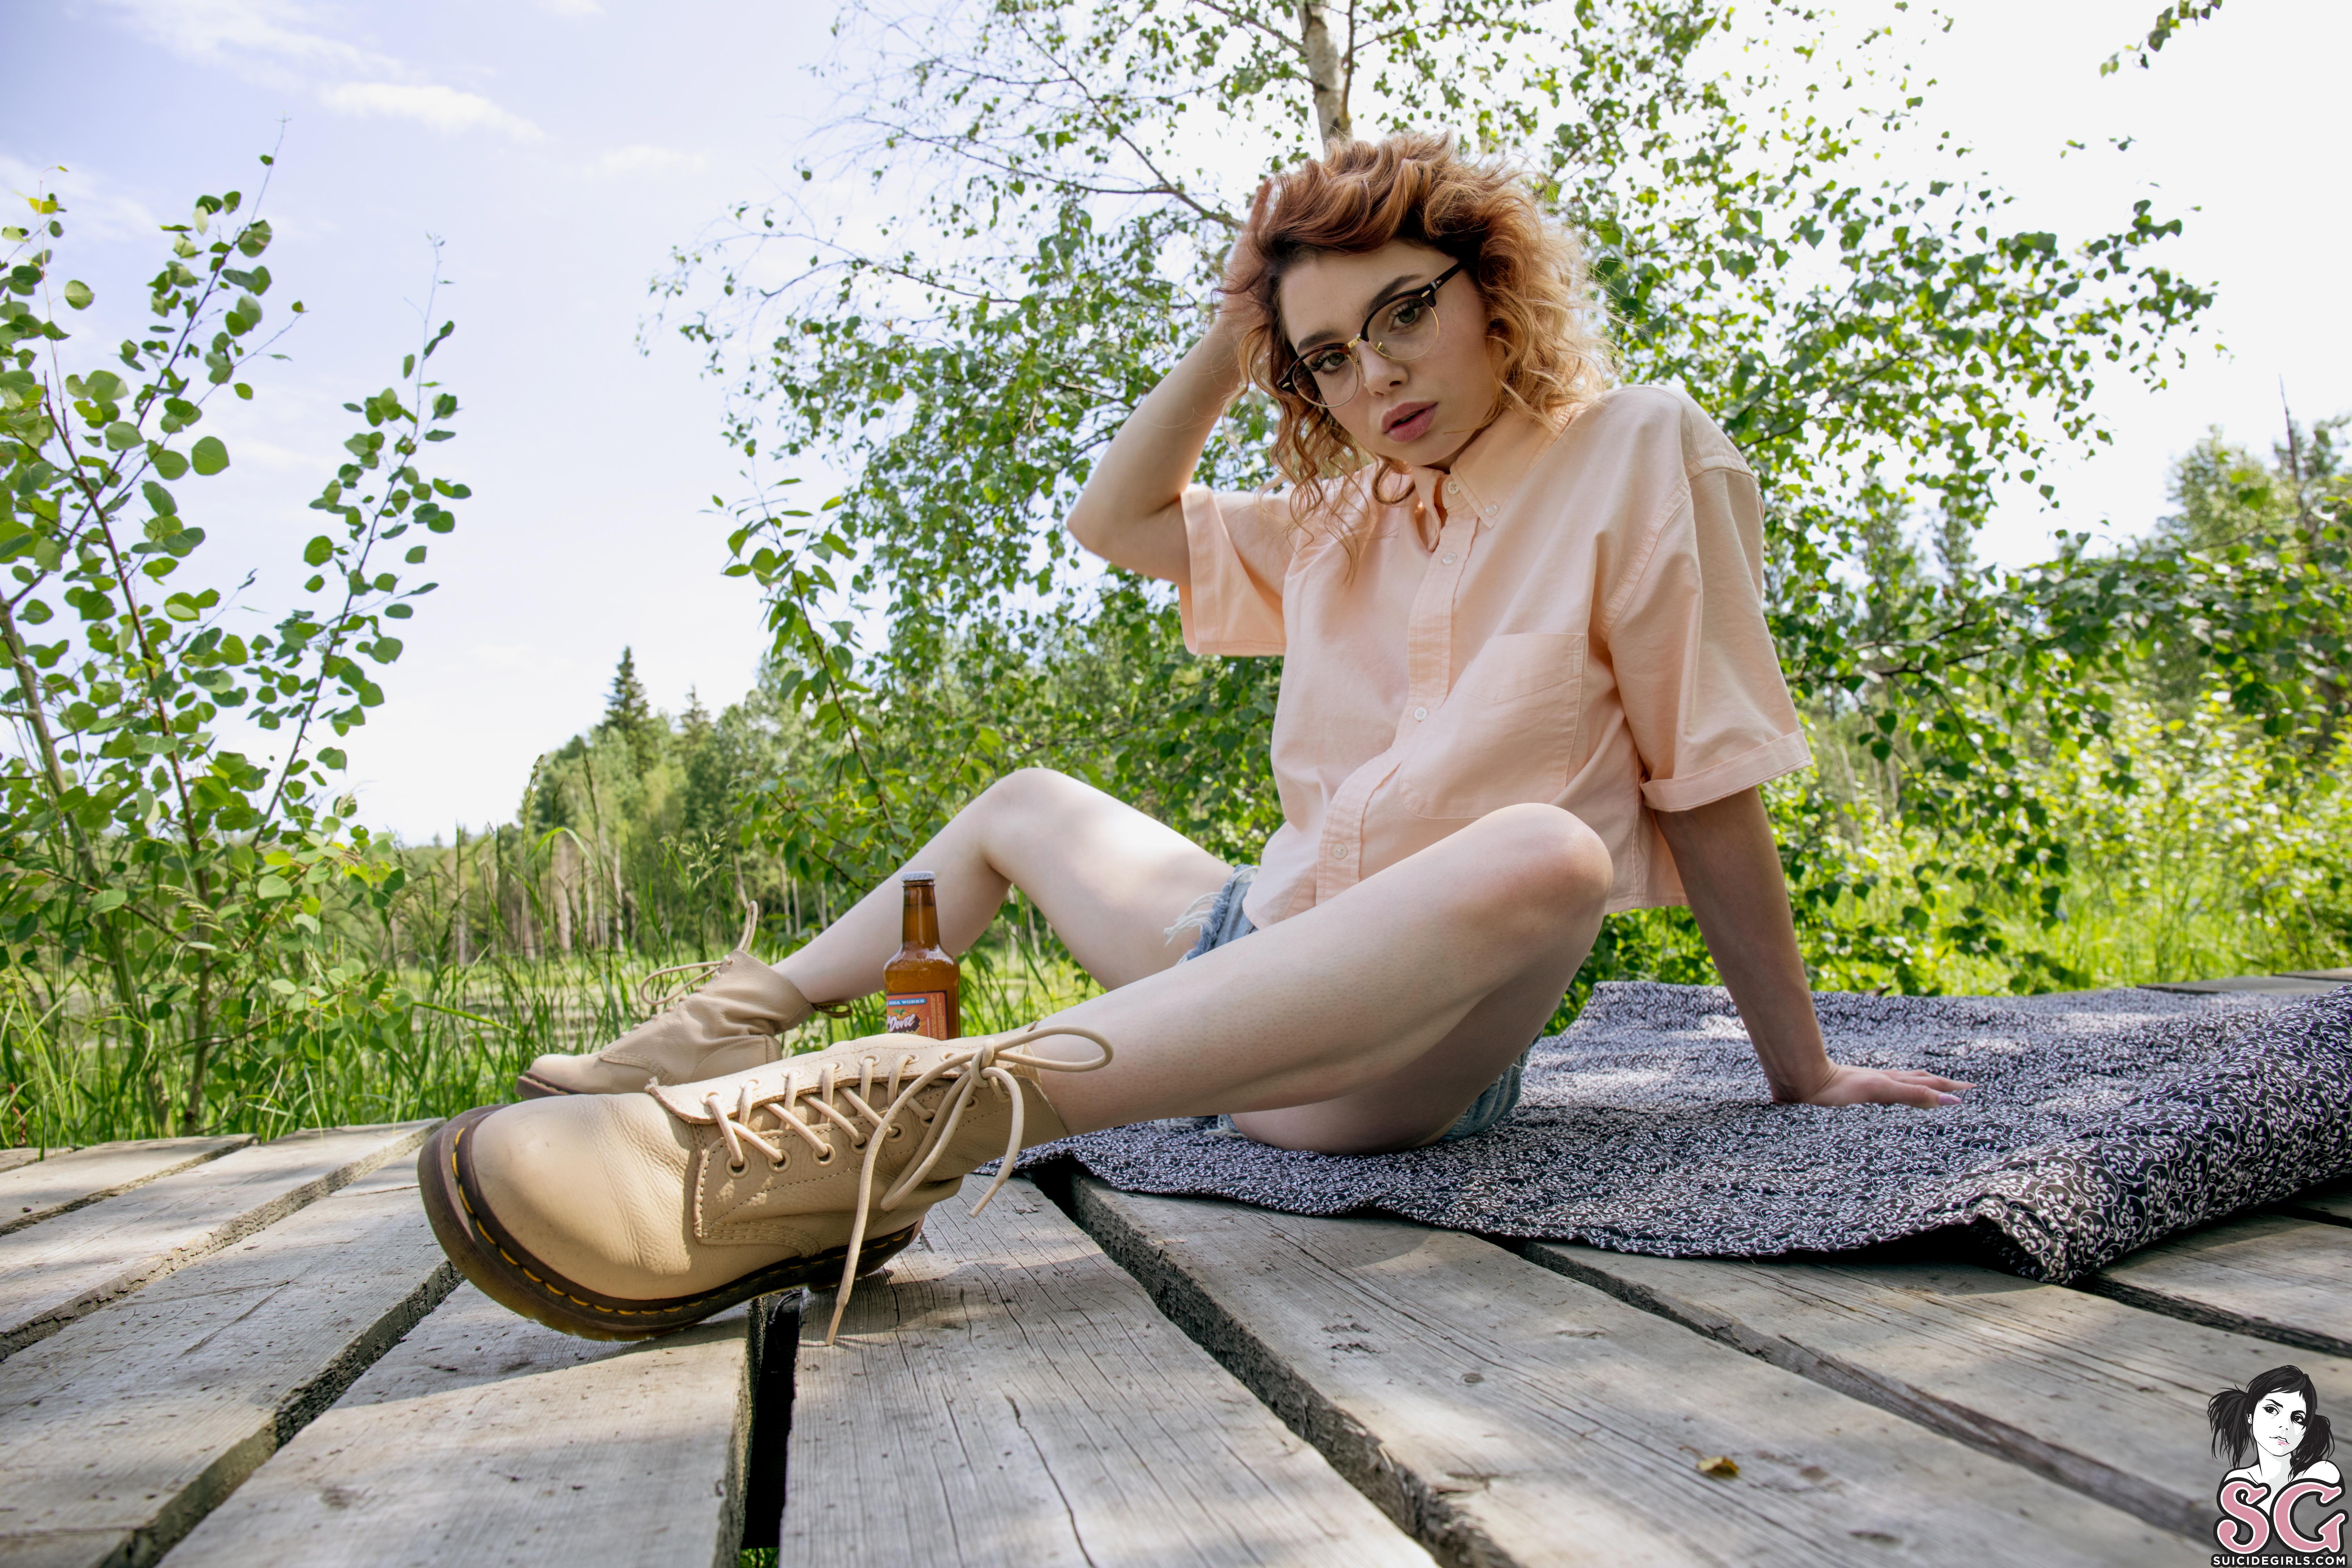 People 6720x4480 women redhead glasses short hair forest blouses boots shorts beer towel Suicide Girls Fleet Suicide wood